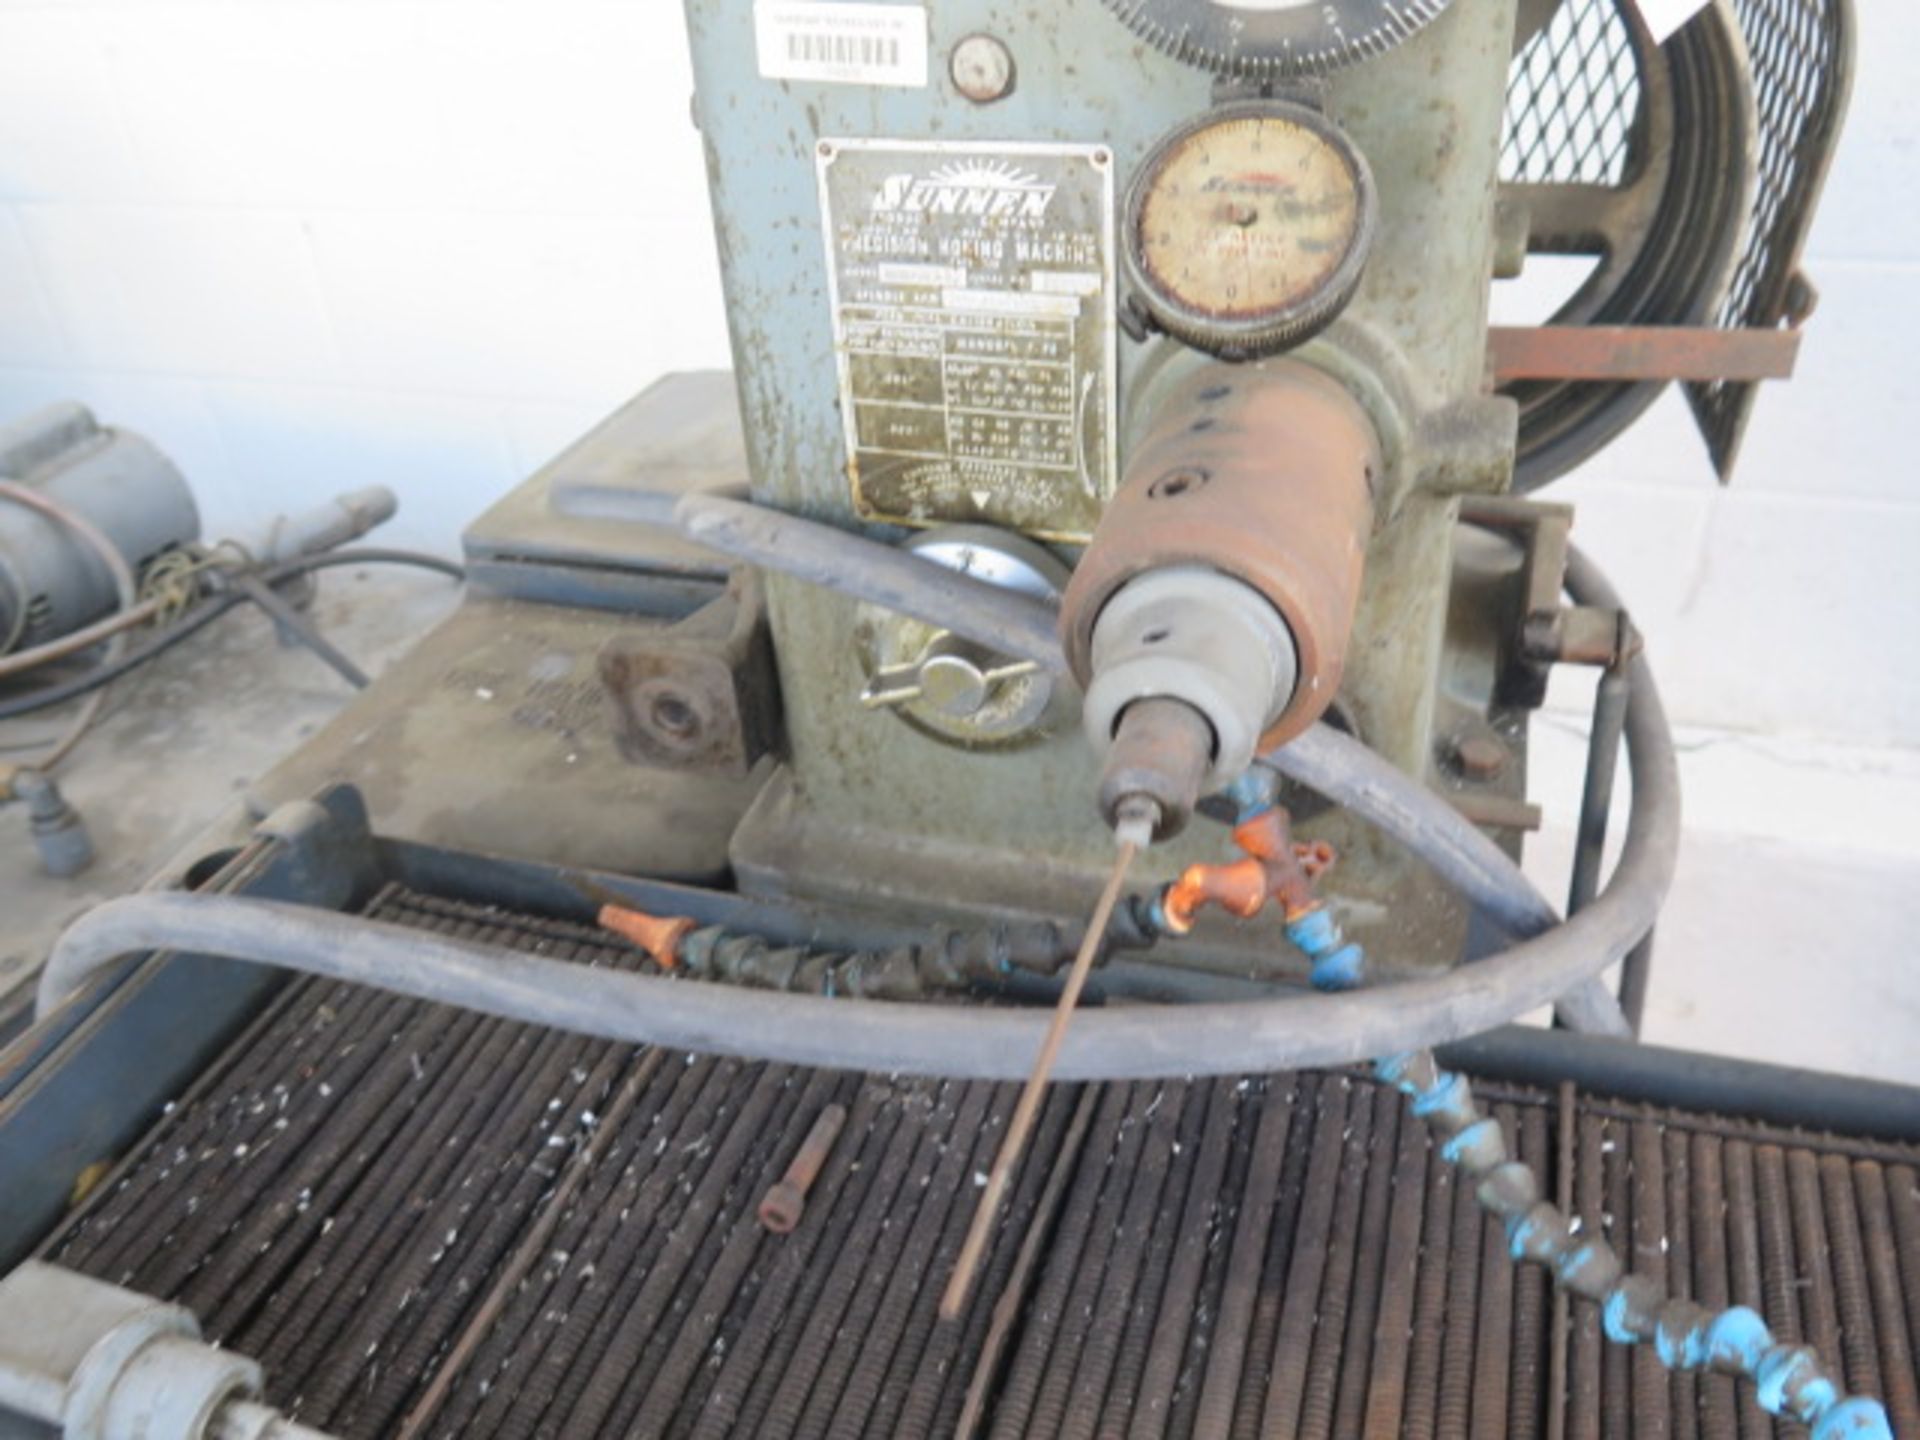 Sunnen mdl. MBB-1290 Honing Machine (SOLD AS-IS - NO WARRANTY) - Image 5 of 6